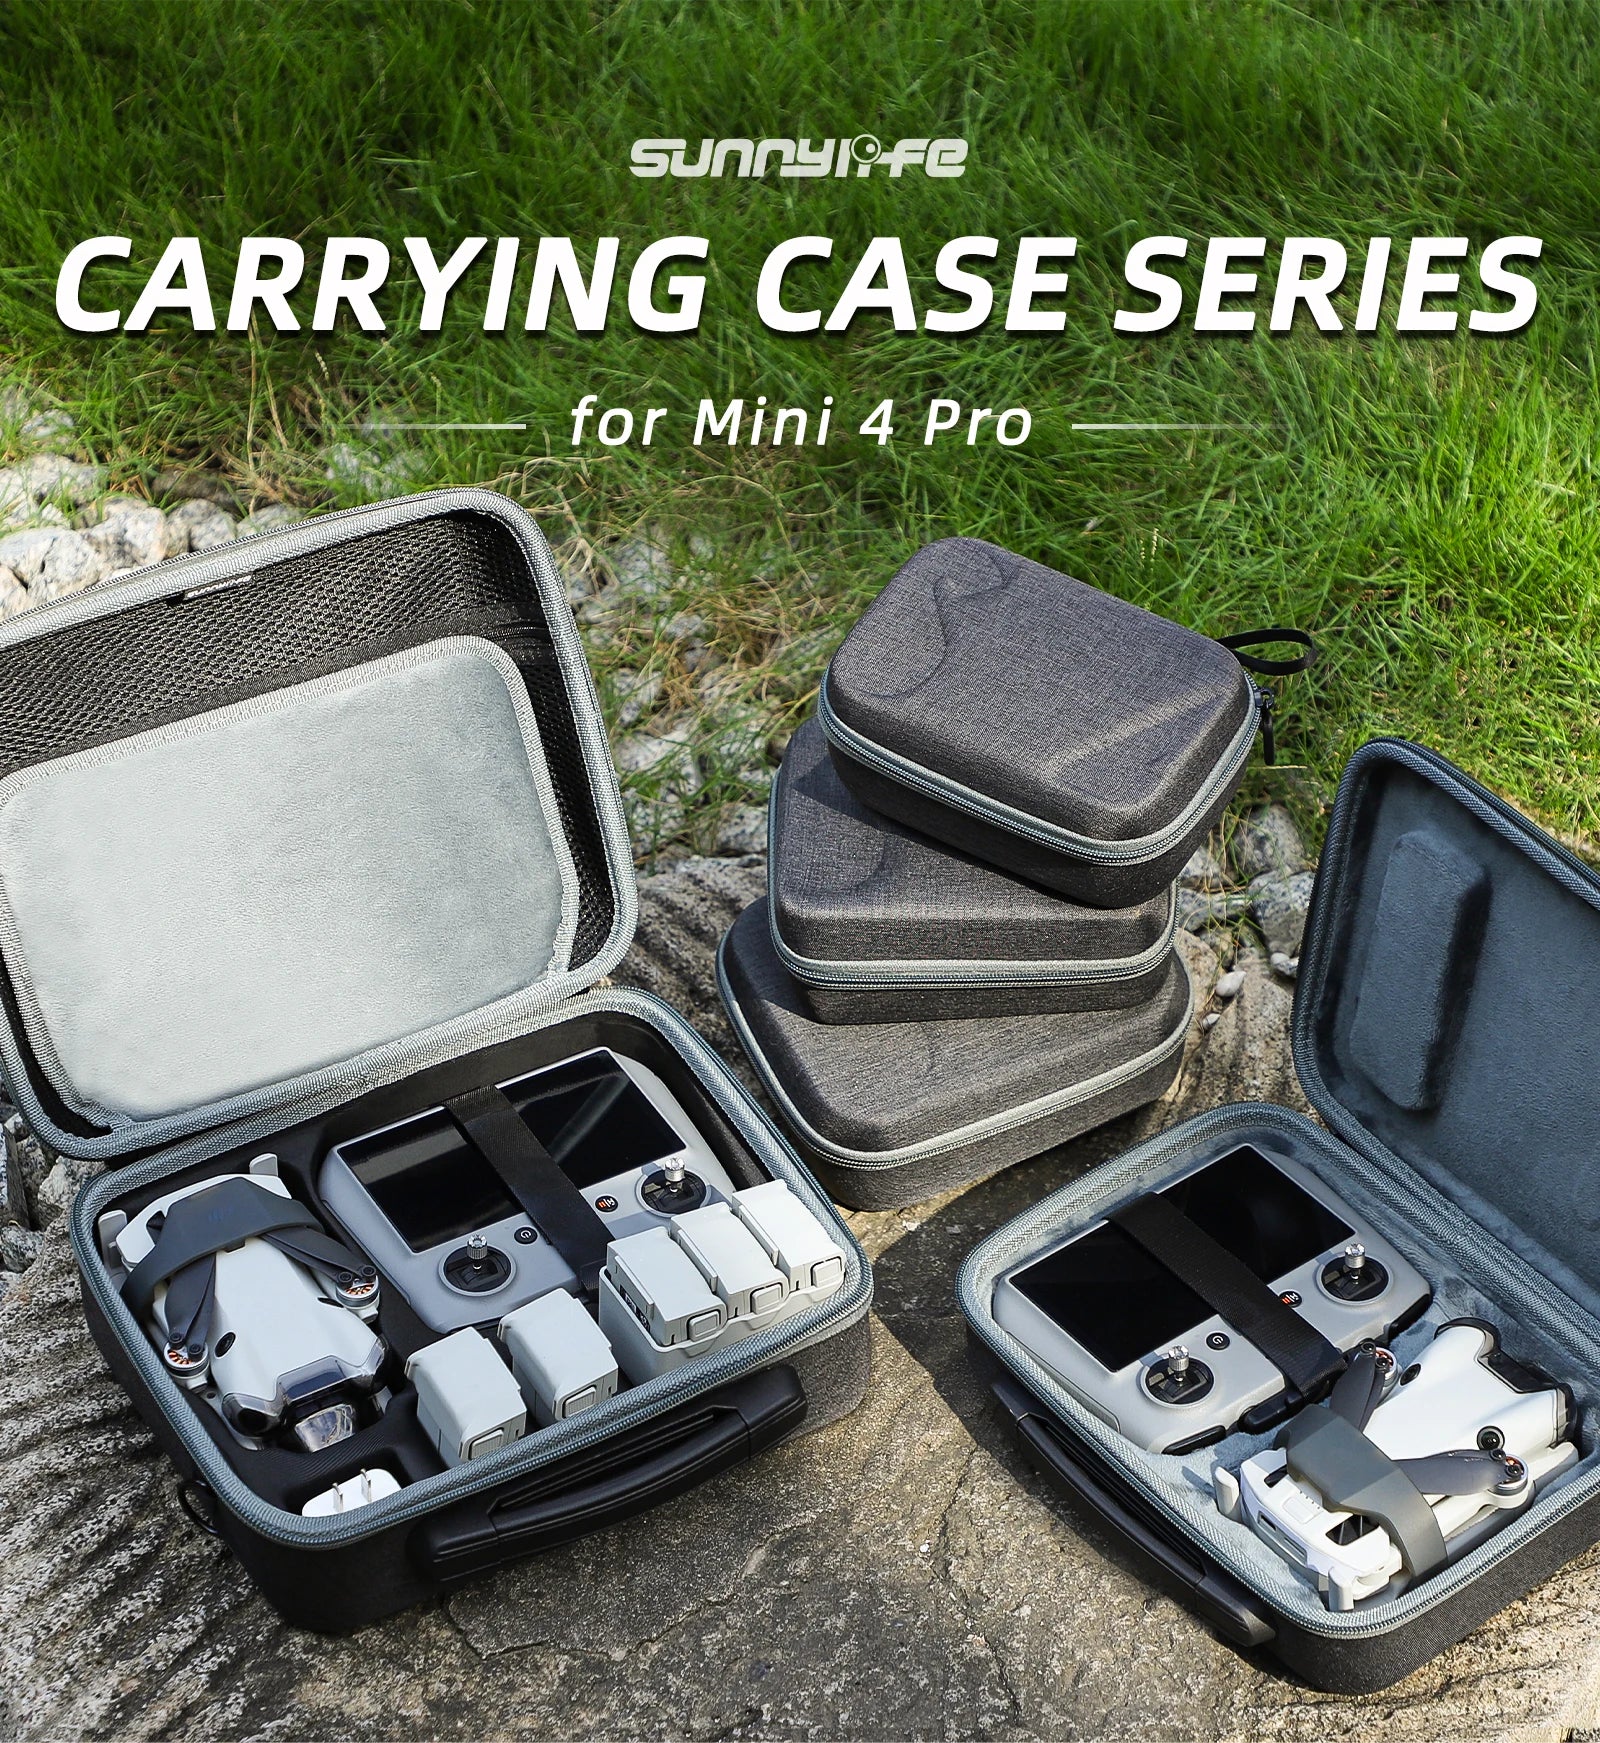 Portable Carrying Case For DJI Mini 4 Pro, SUnnYioFe CARRYING CASE SERIES for